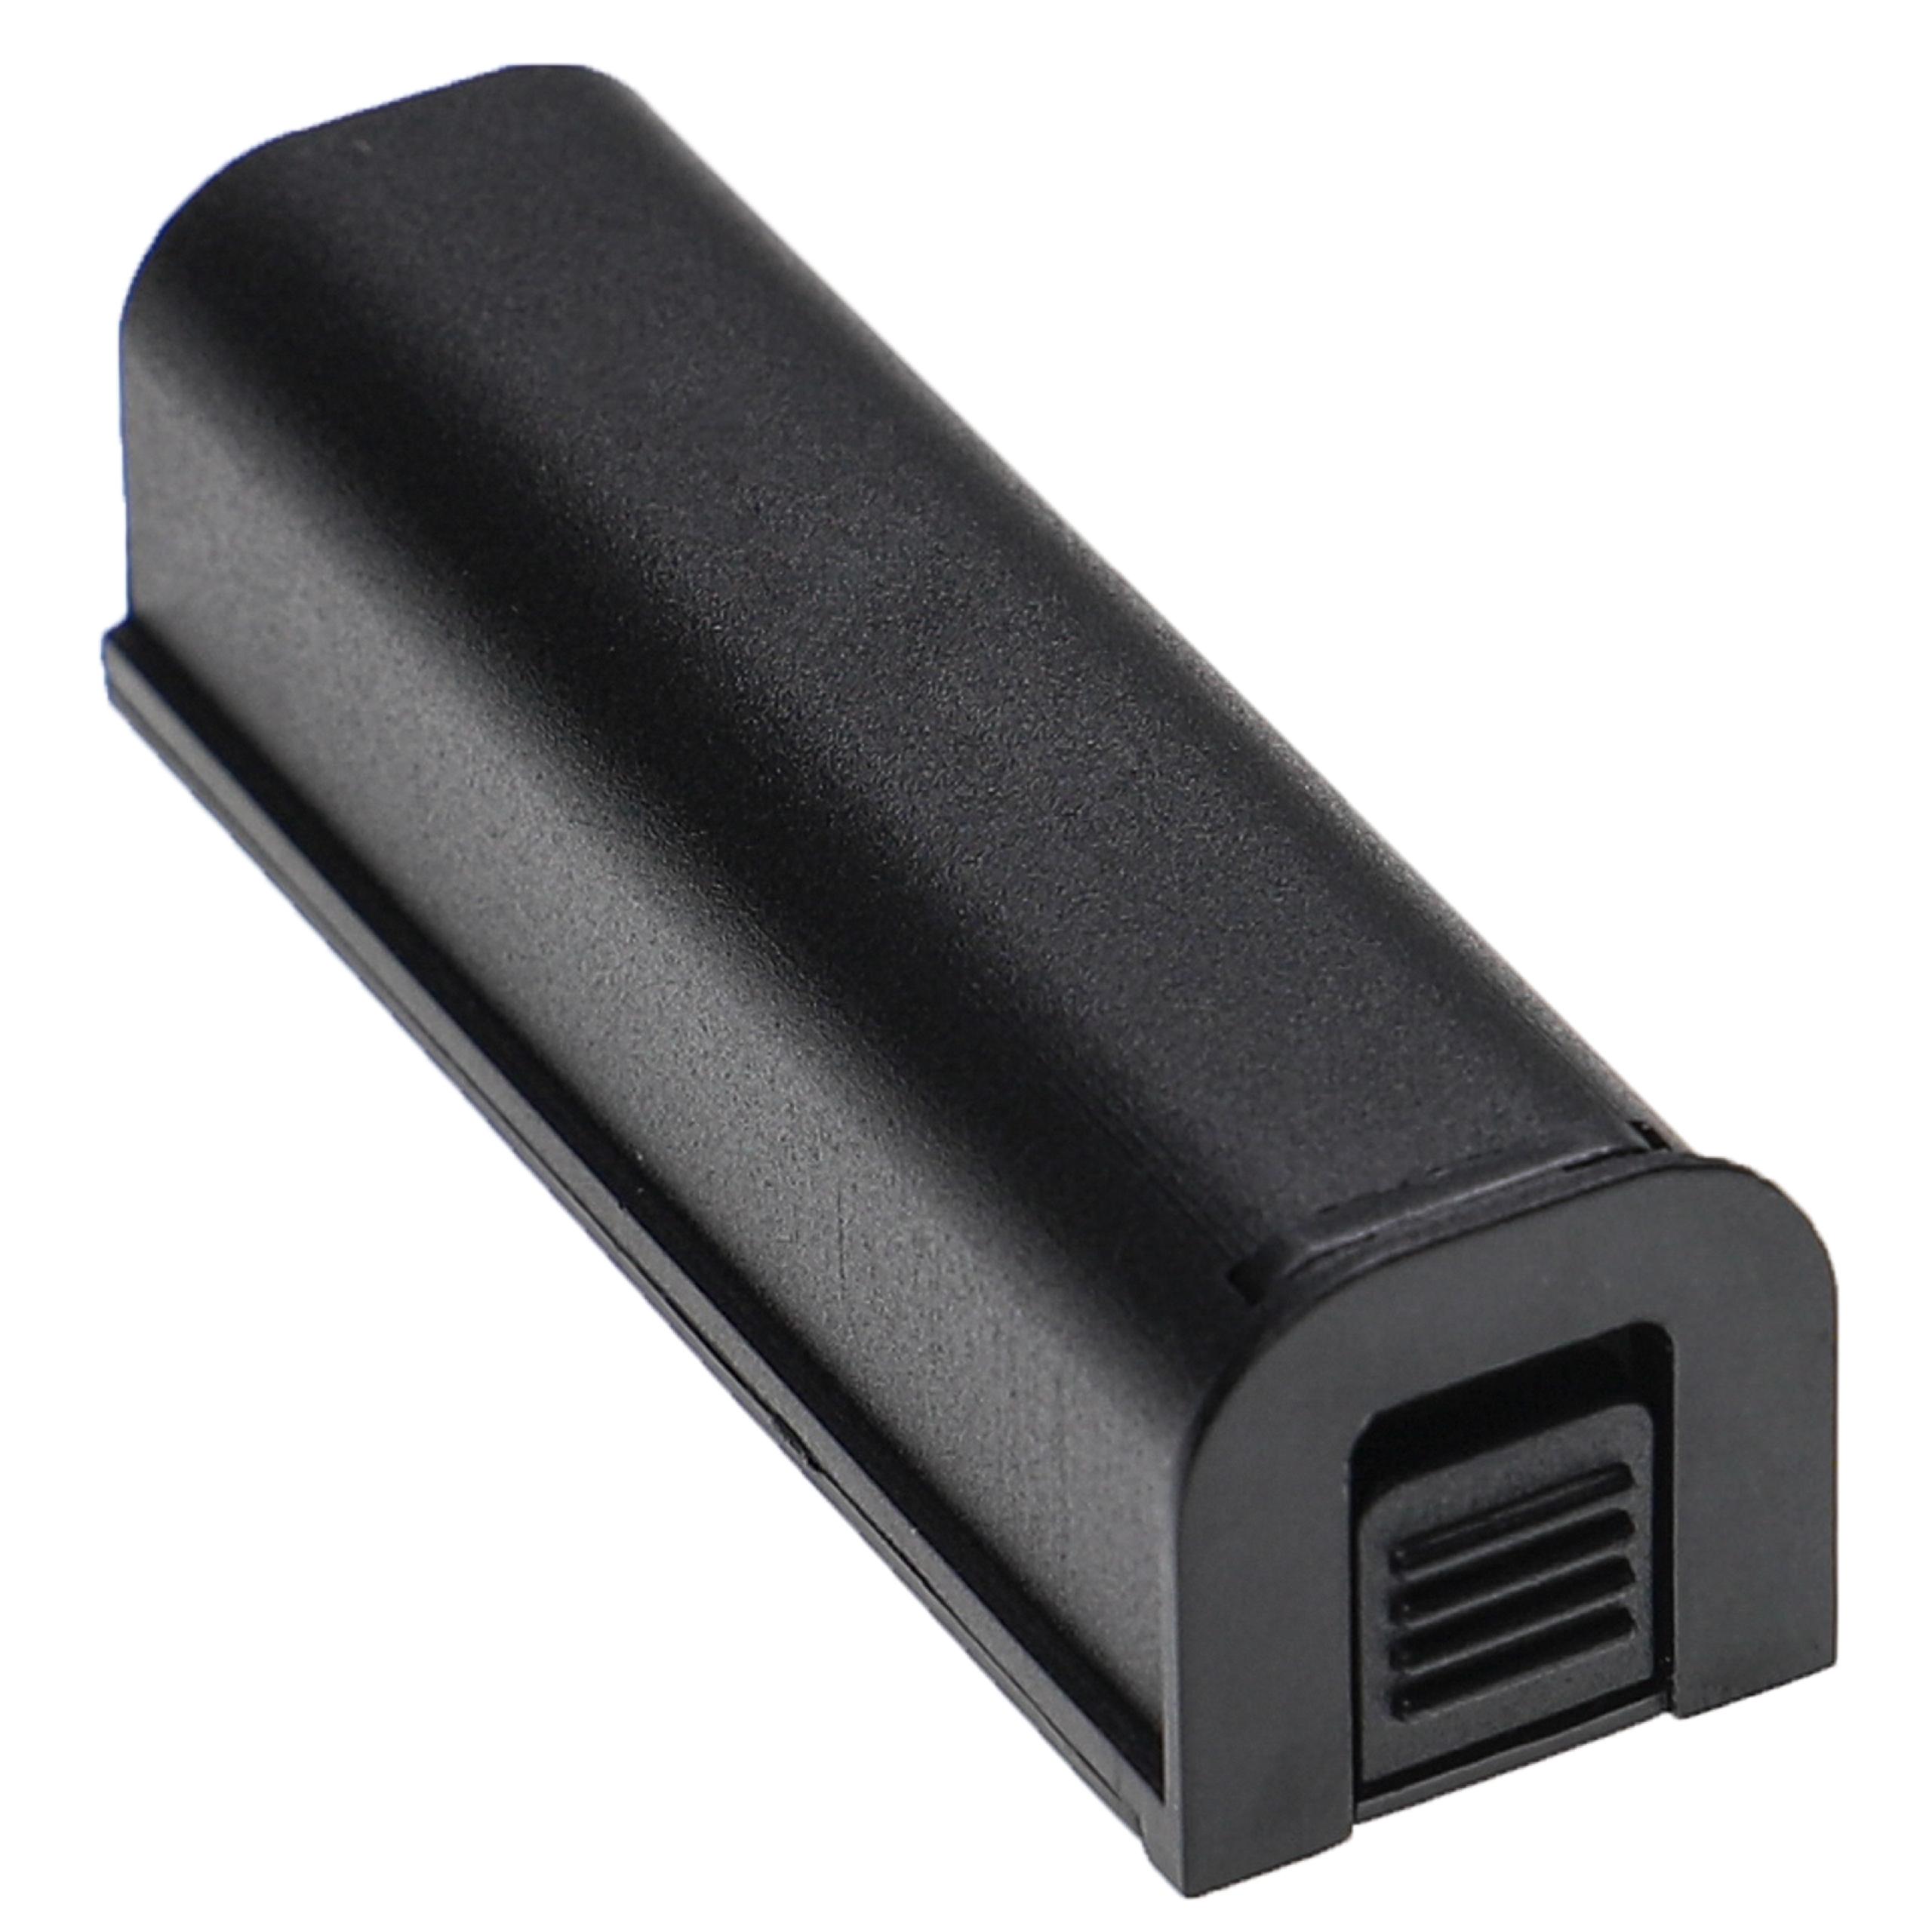 Barcode Scanner POS Battery Replacement for CipherLab BA-000700 - 700mAh 3.7V Li-Ion